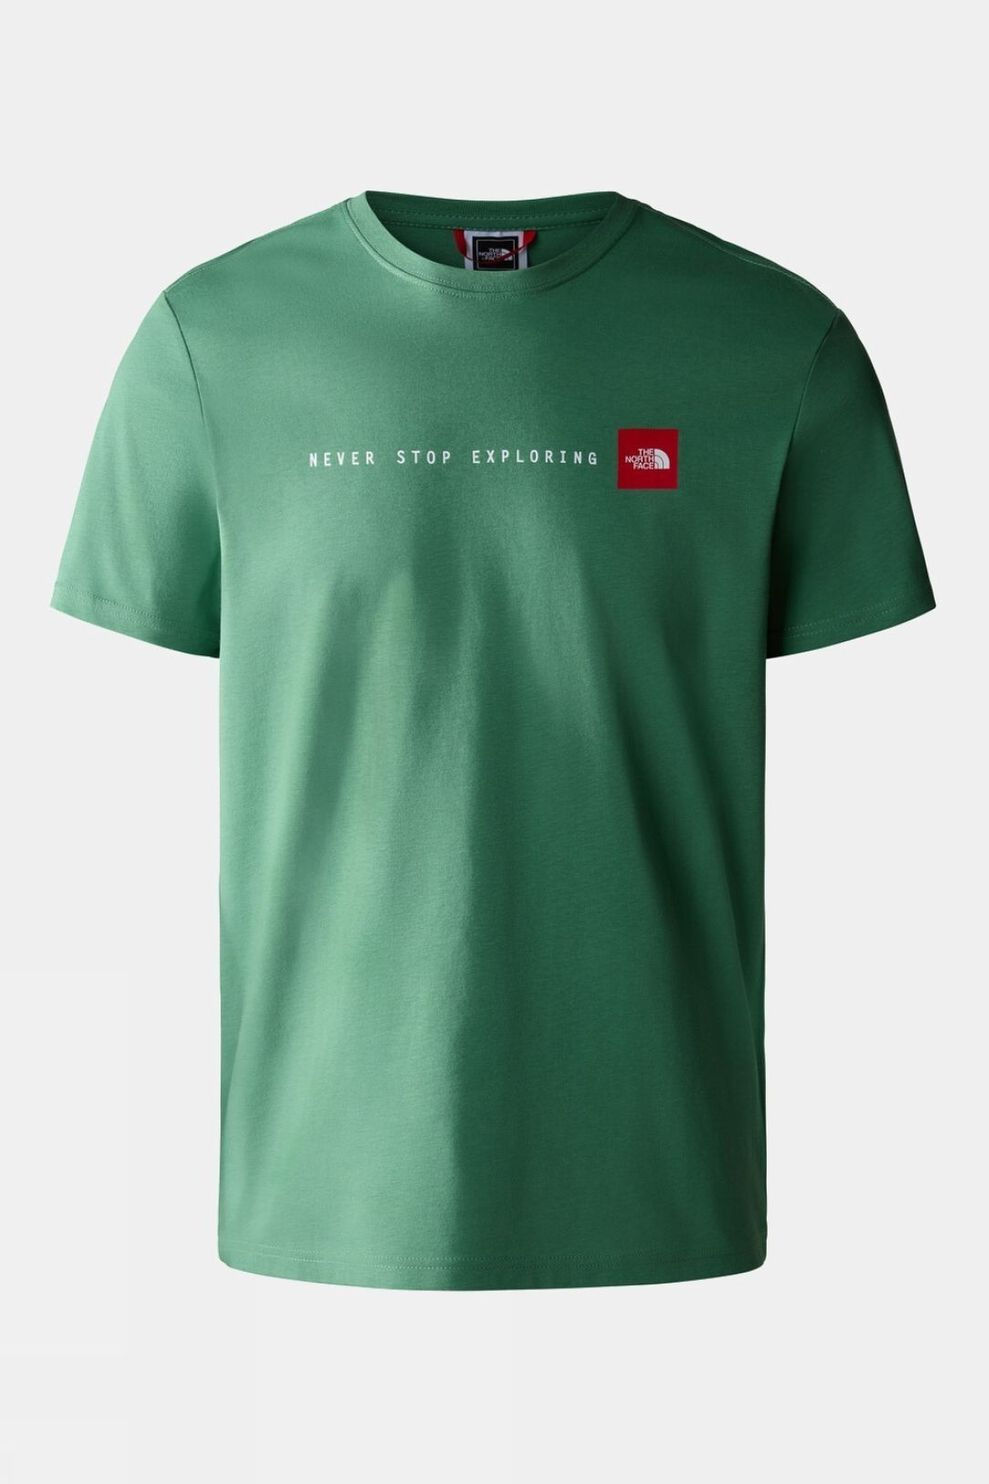 The North Face Mens Never Stop Exploring T-Shirt